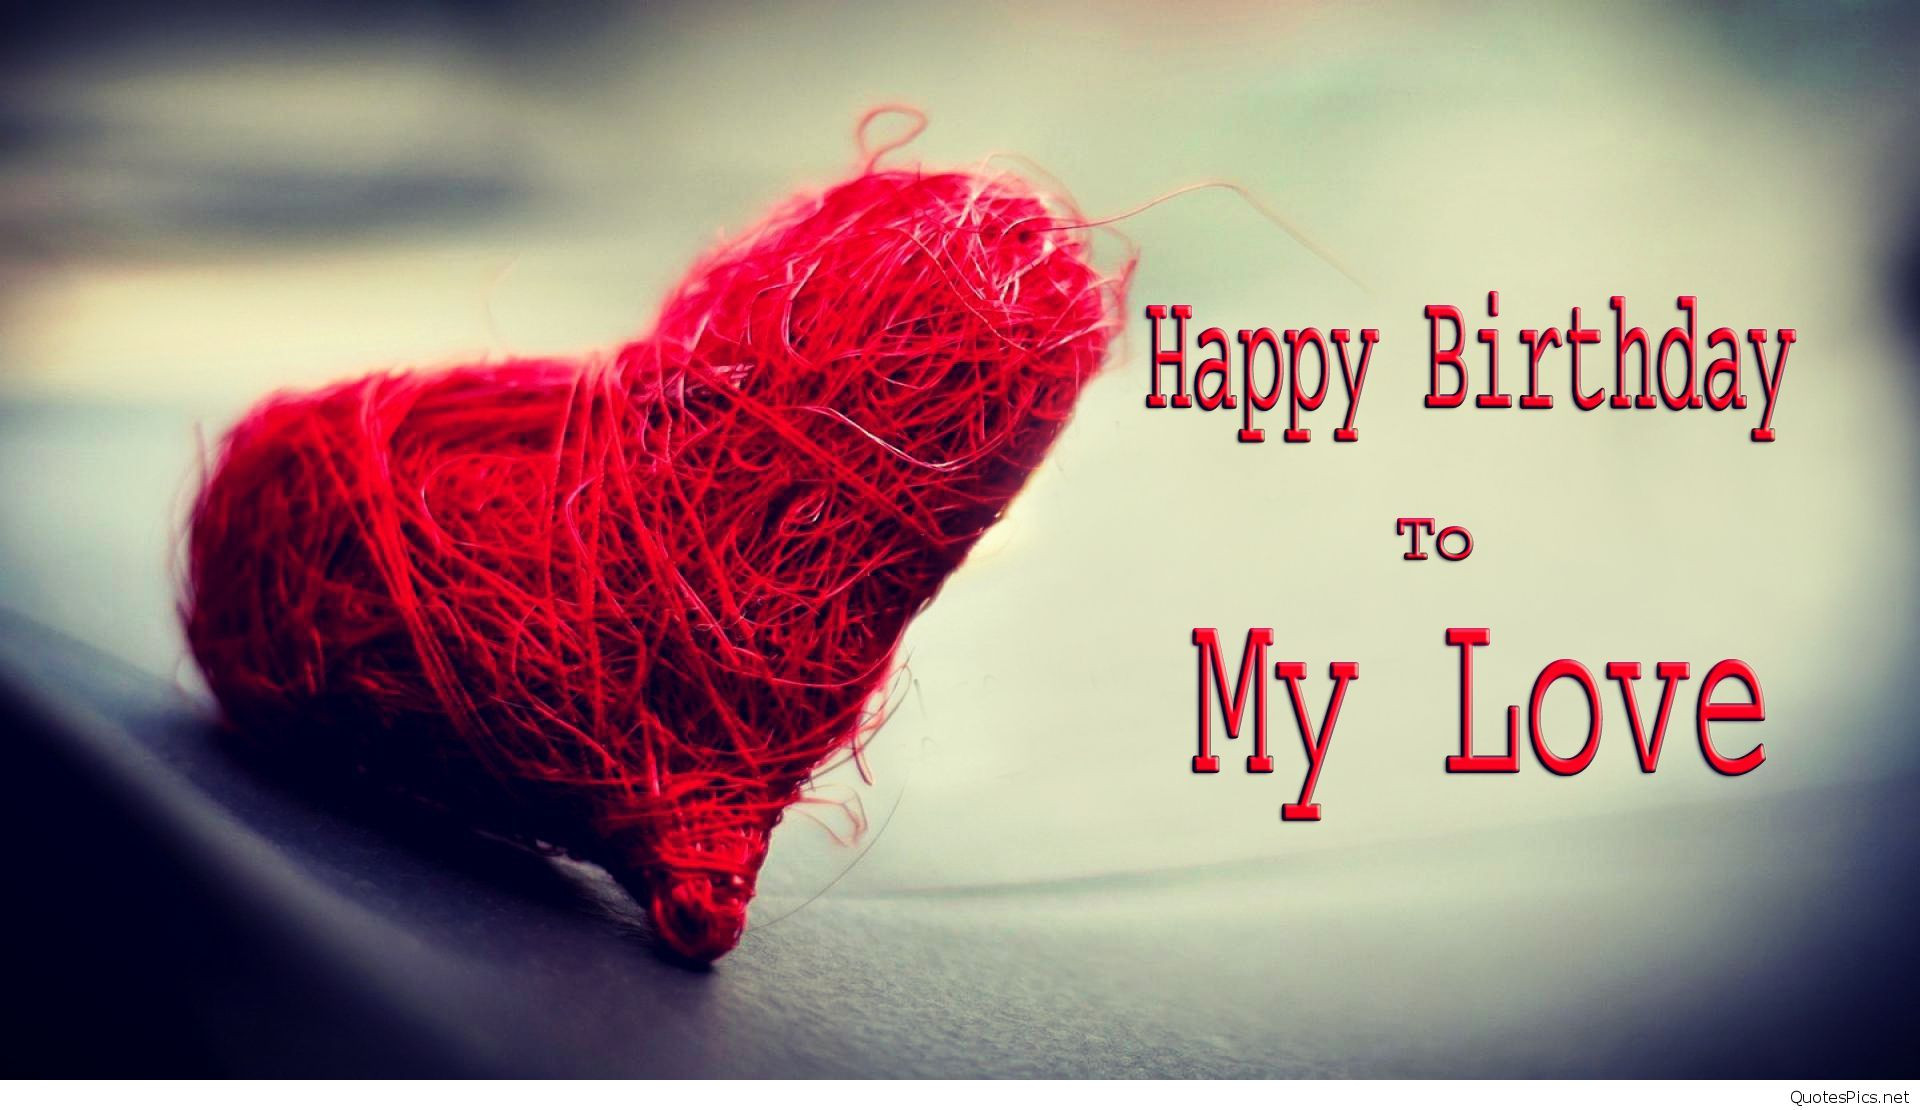 Birthday Wishes For My Love
 Love happy birthday wishes cards sayings